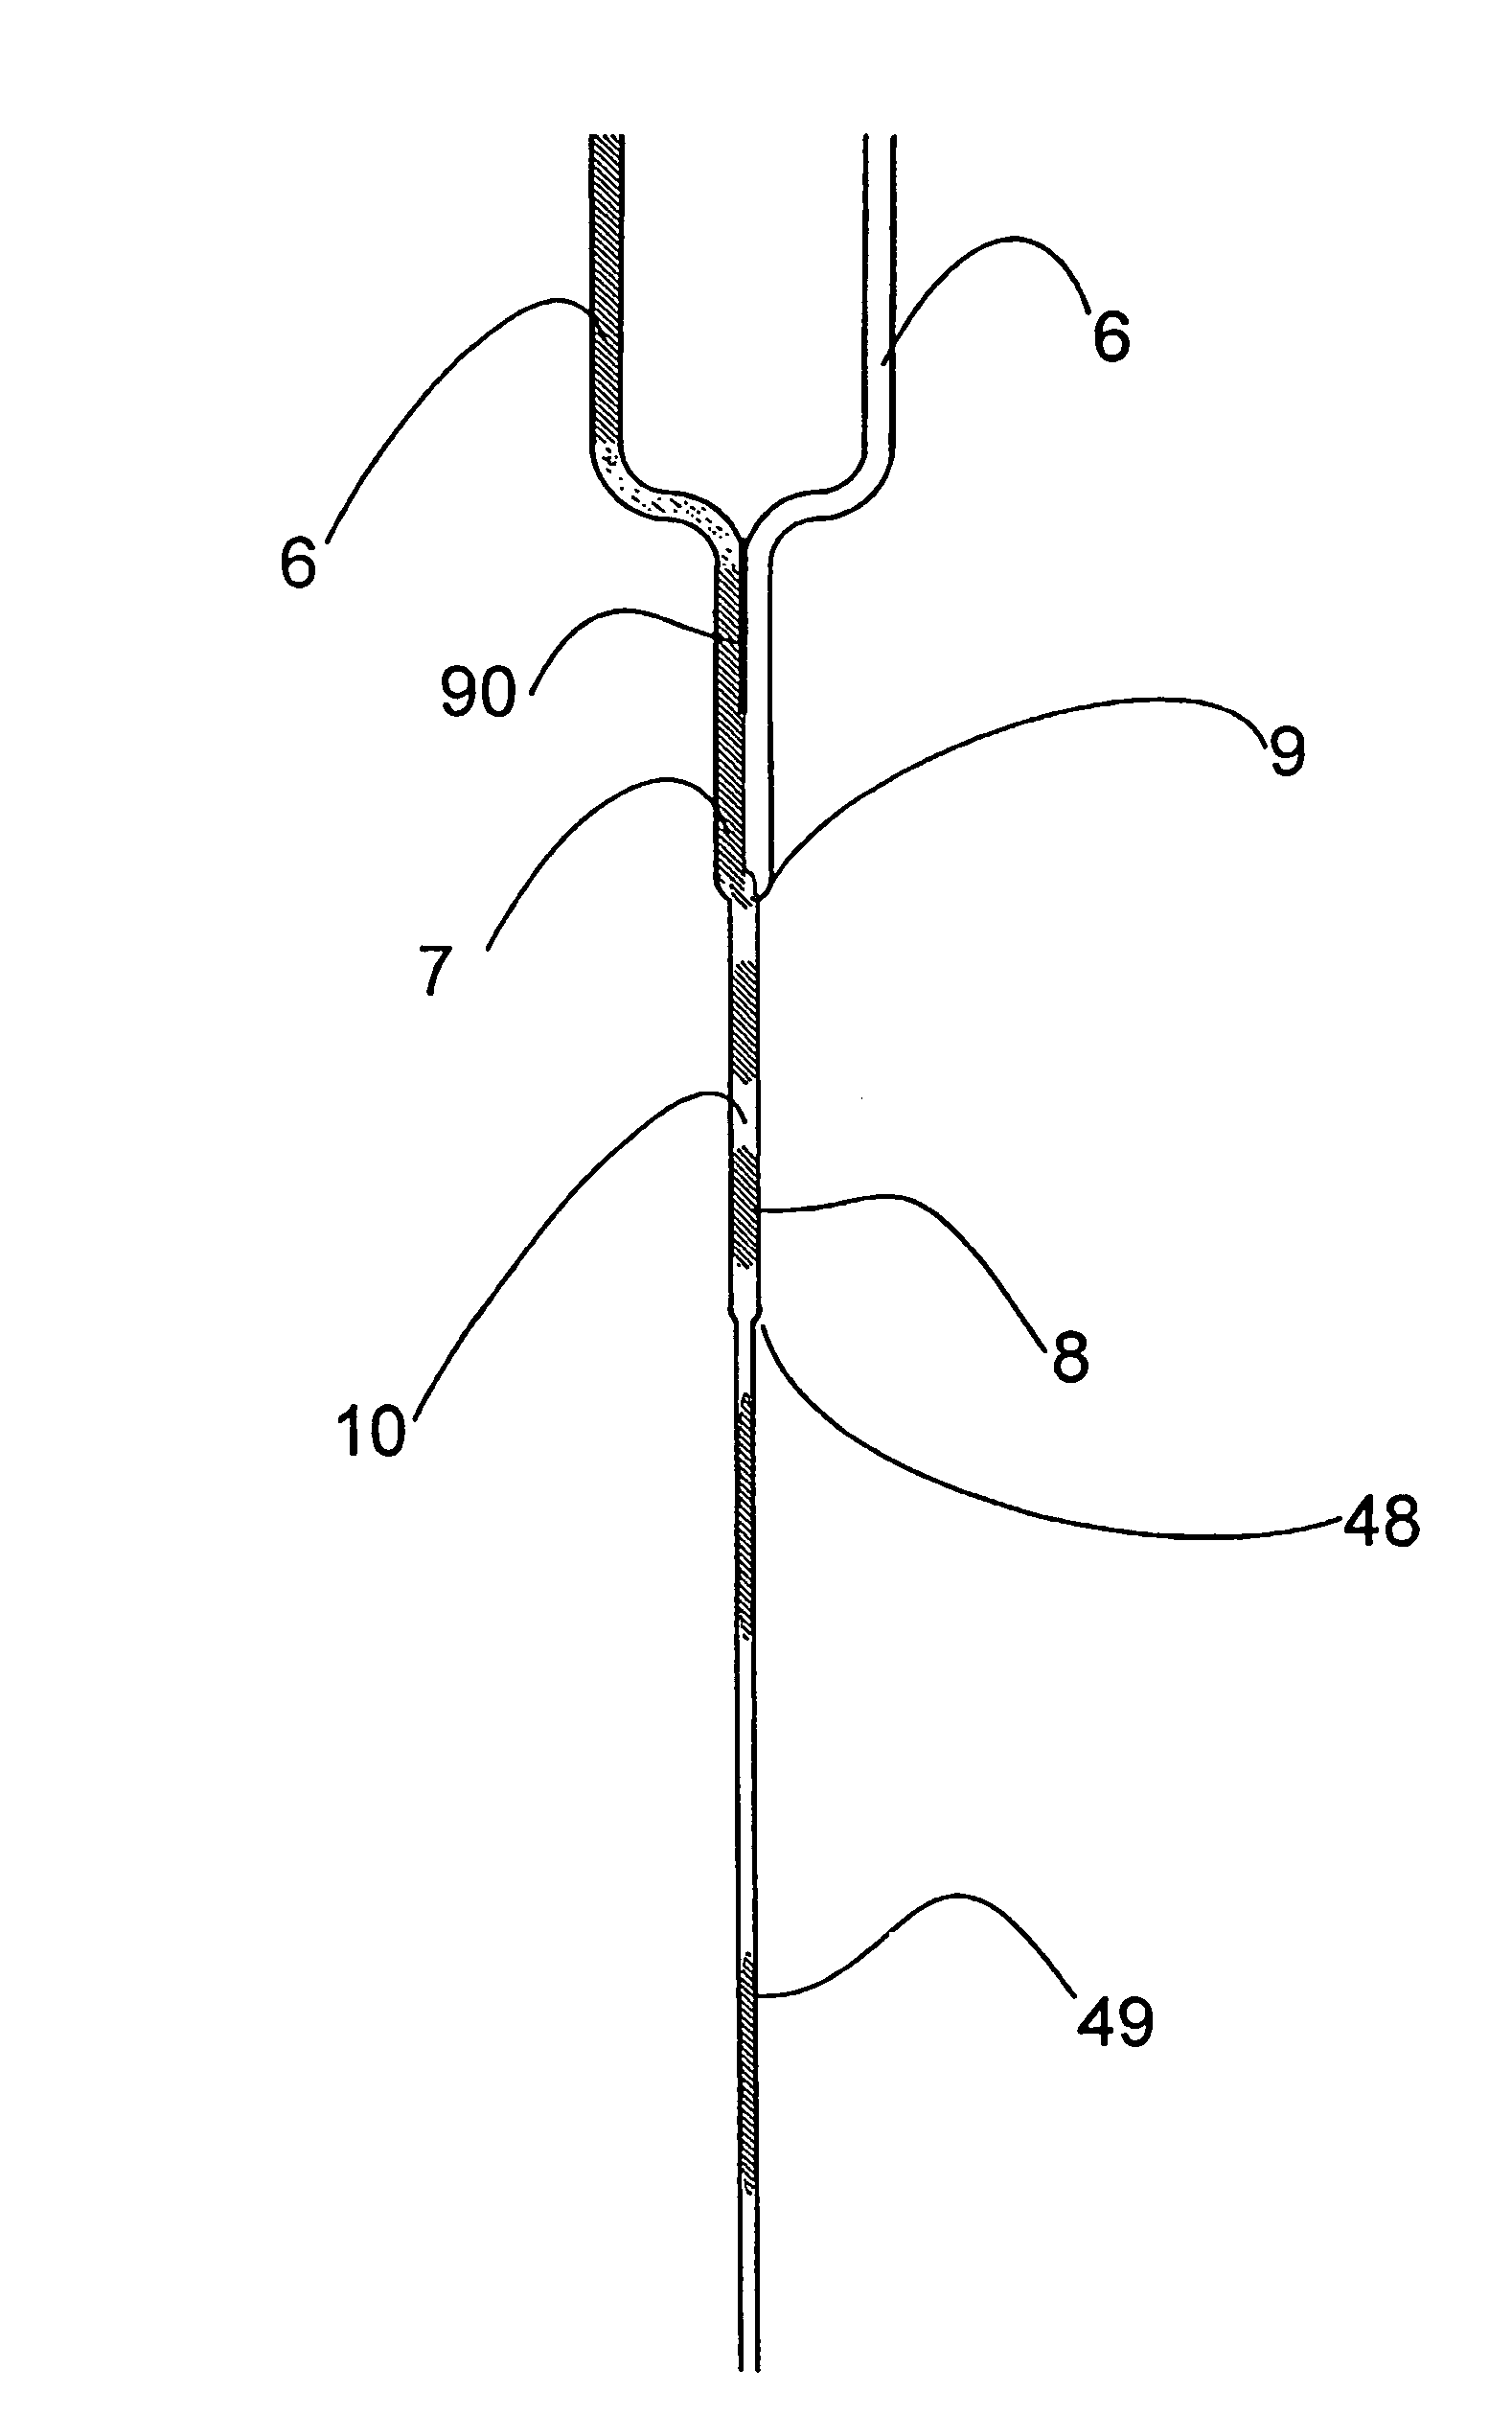 Microfluidic device and methods for construction and application